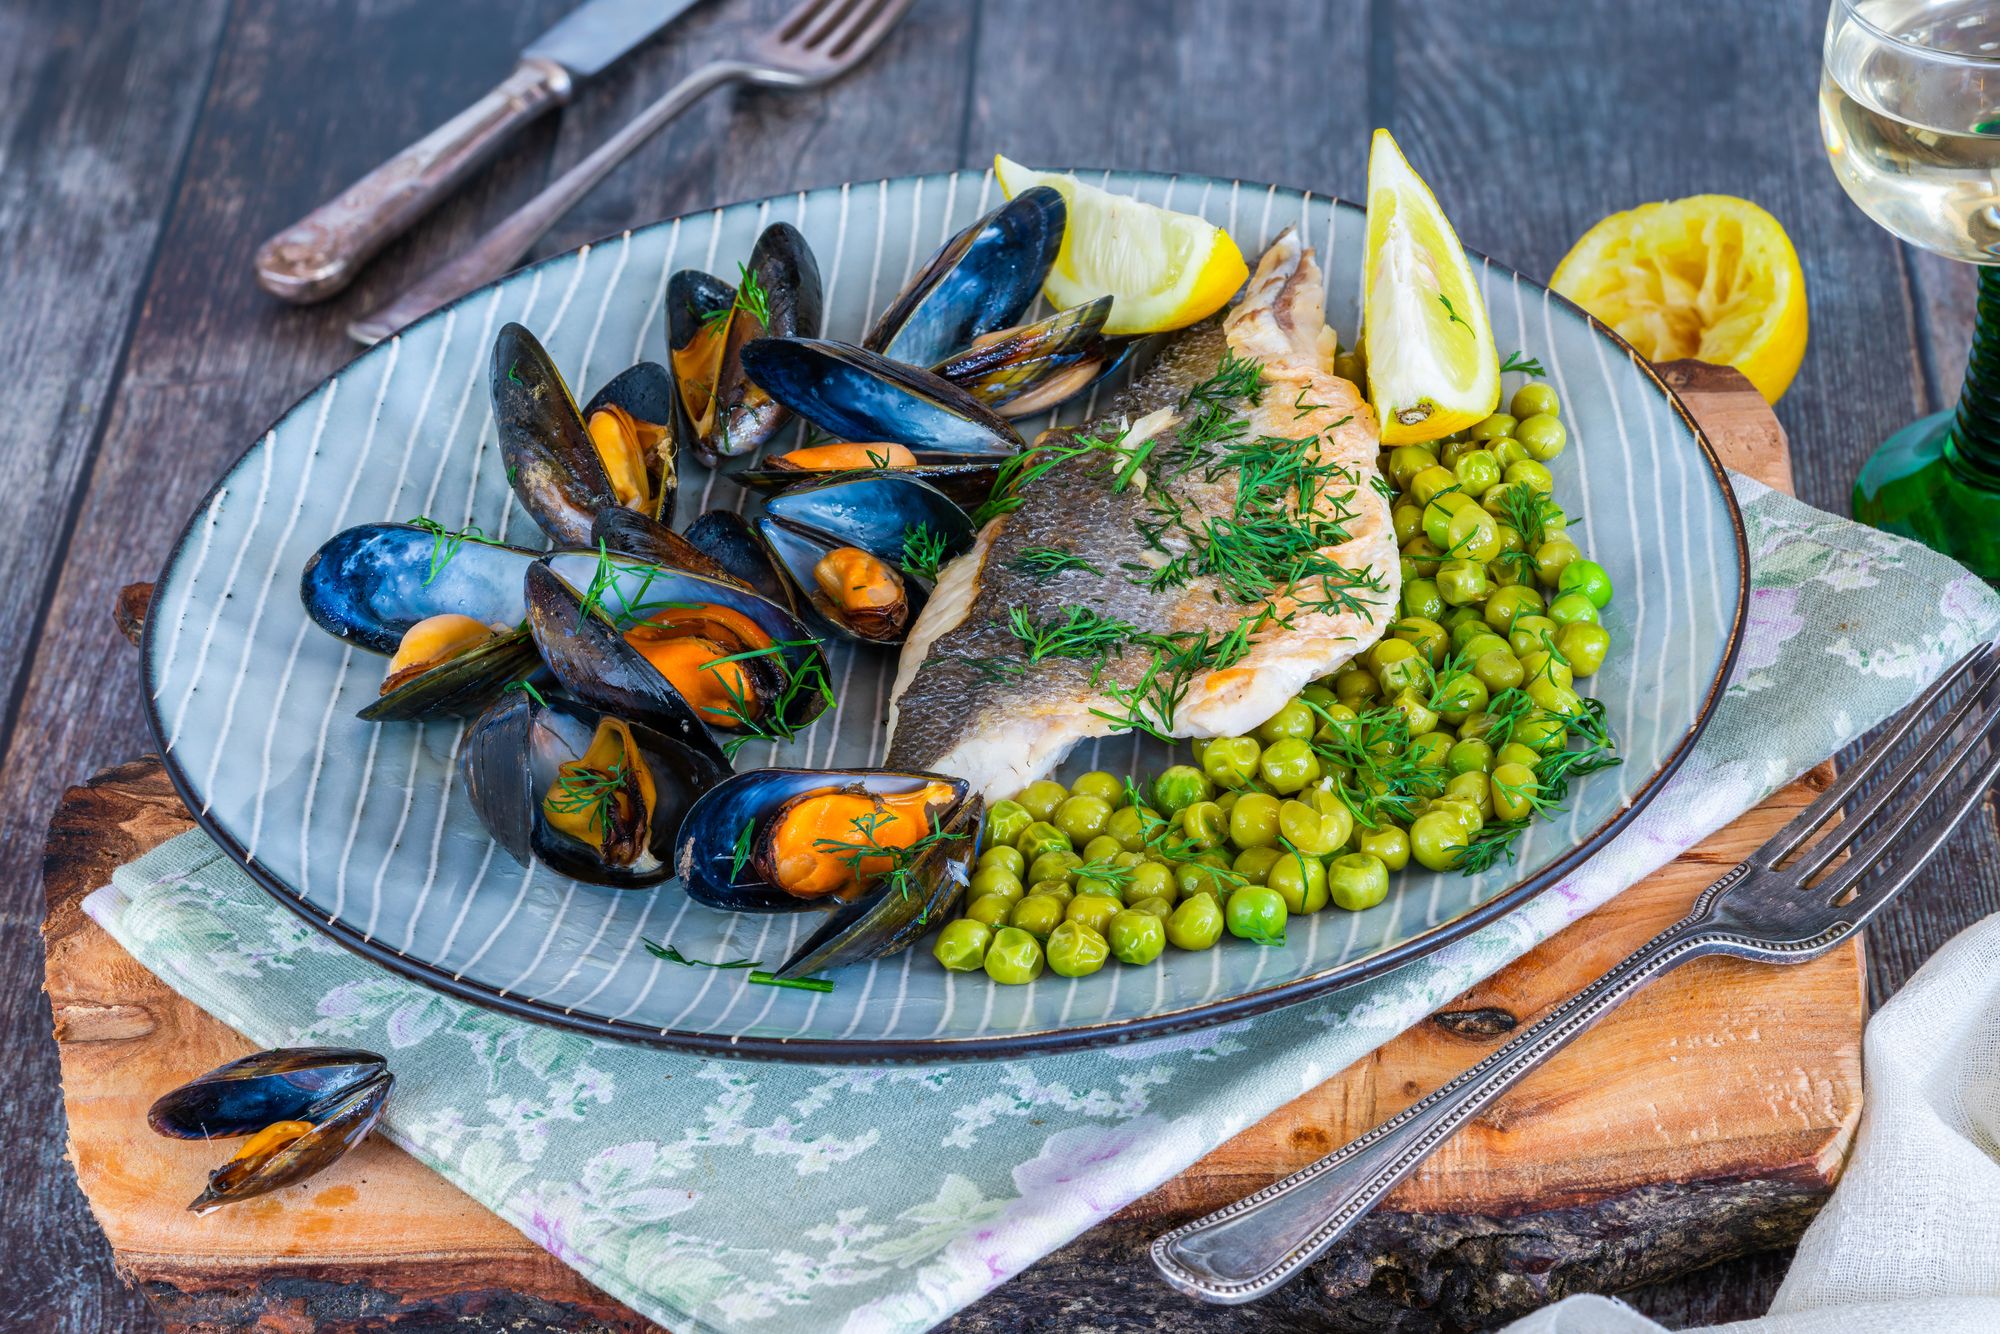 Lemon Sole with Brown Butter and Mussels